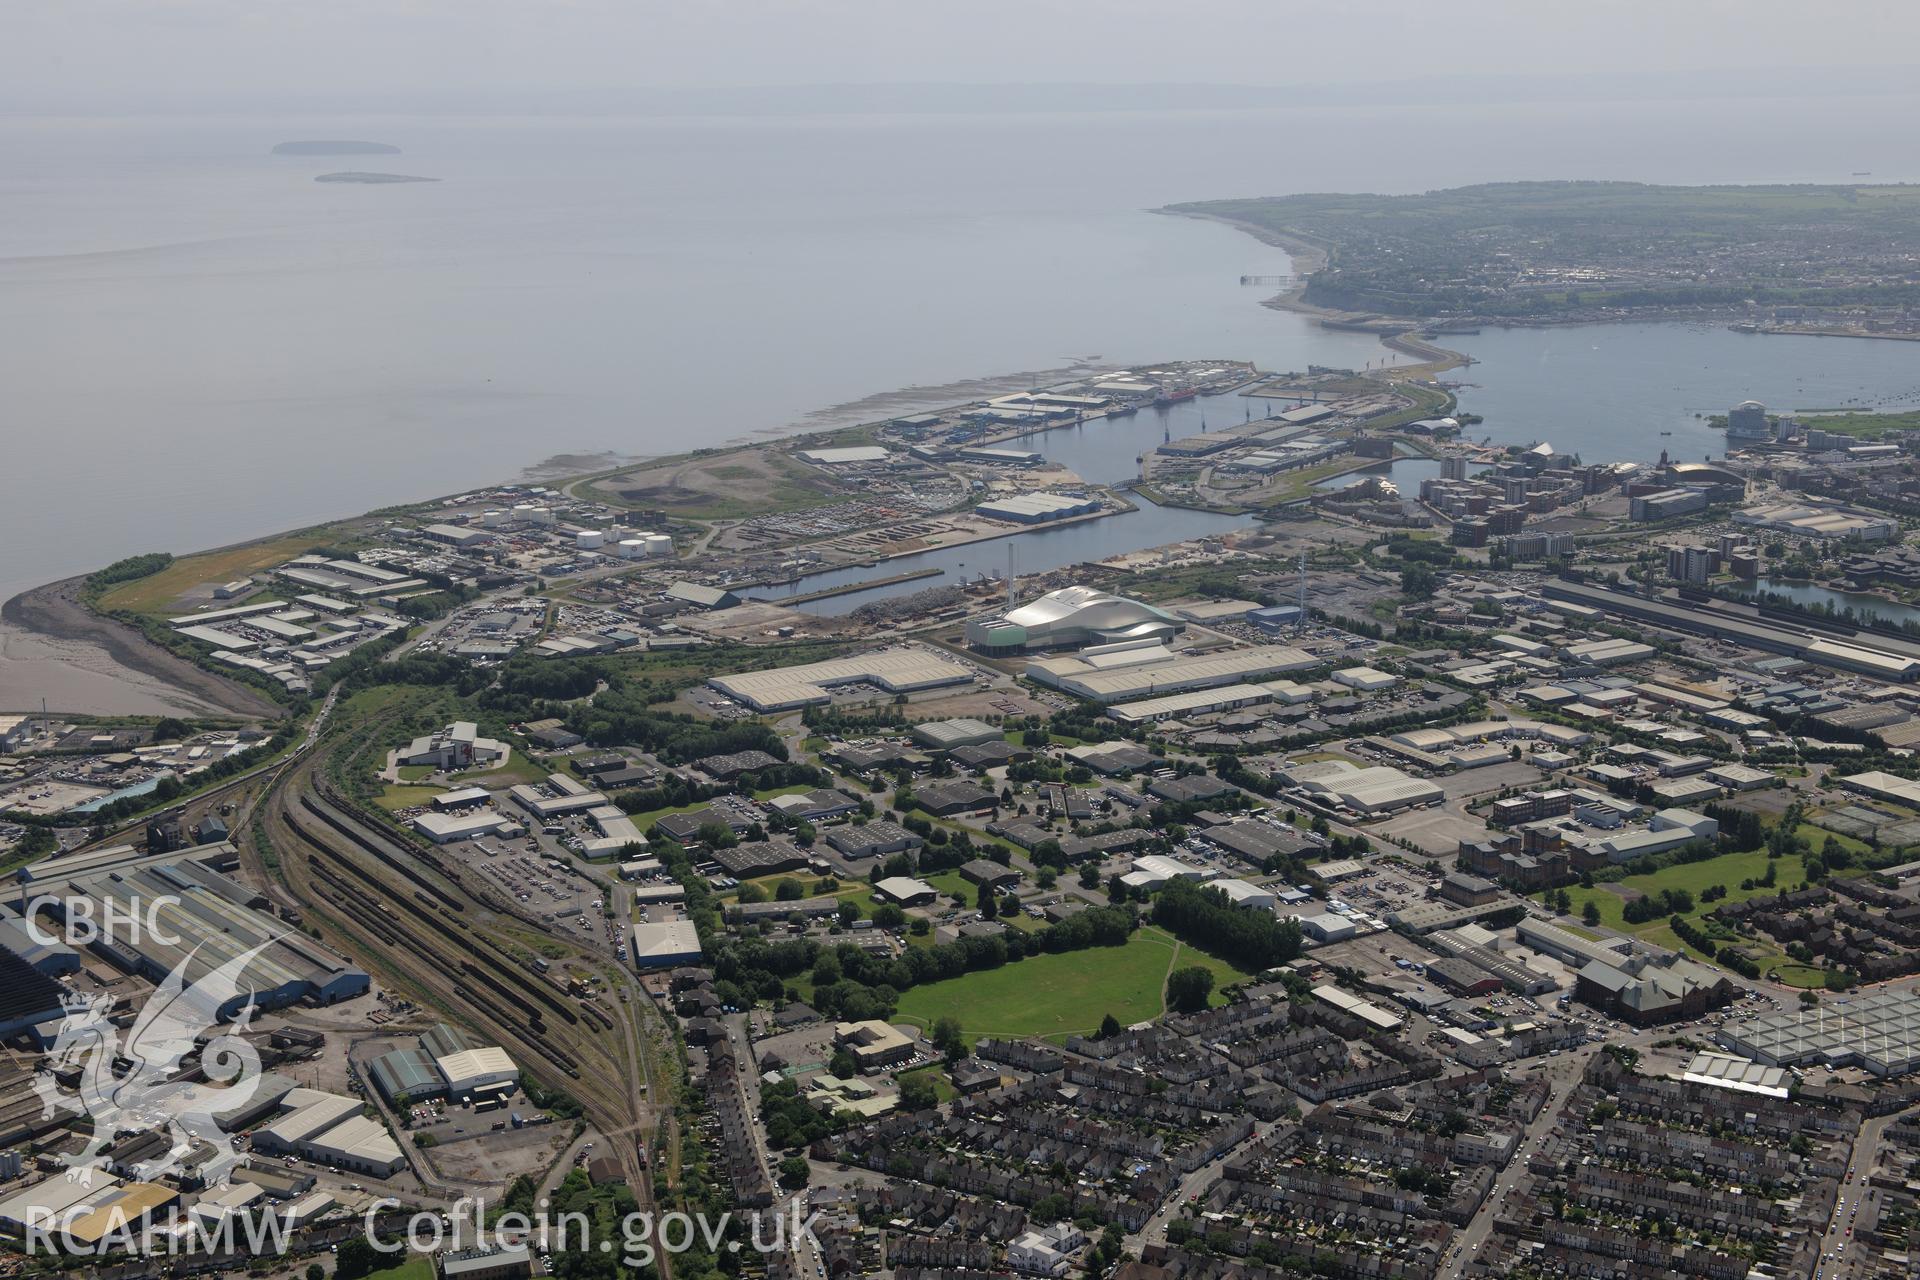 Roath Docks and Queen Alexandra Dock at Cardiff Docks, Cardiff Bay. Oblique aerial photograph taken during the Royal Commission's programme of archaeological aerial reconnaissance by Toby Driver on 29th June 2015.